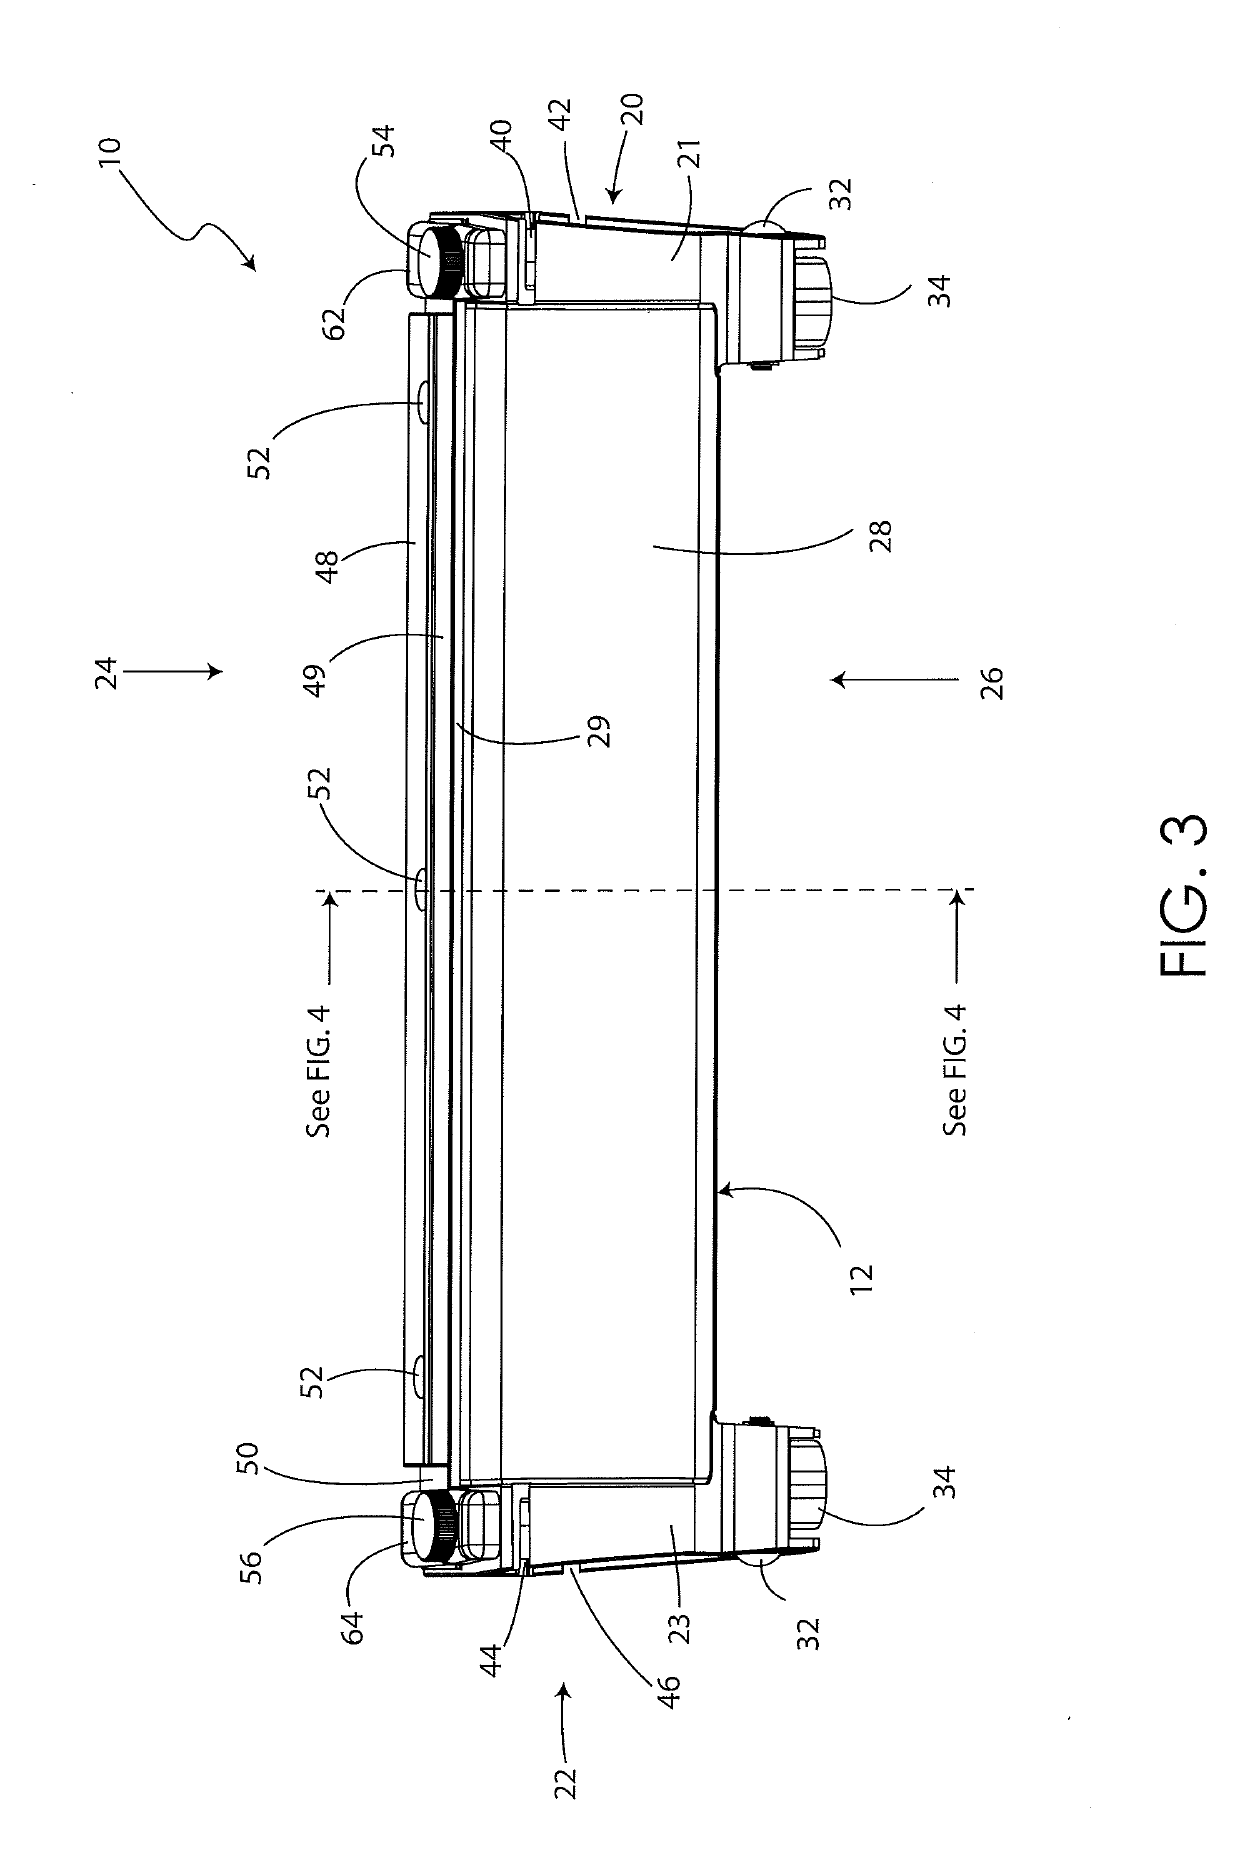 Apparatus and method for shaping drywall mud